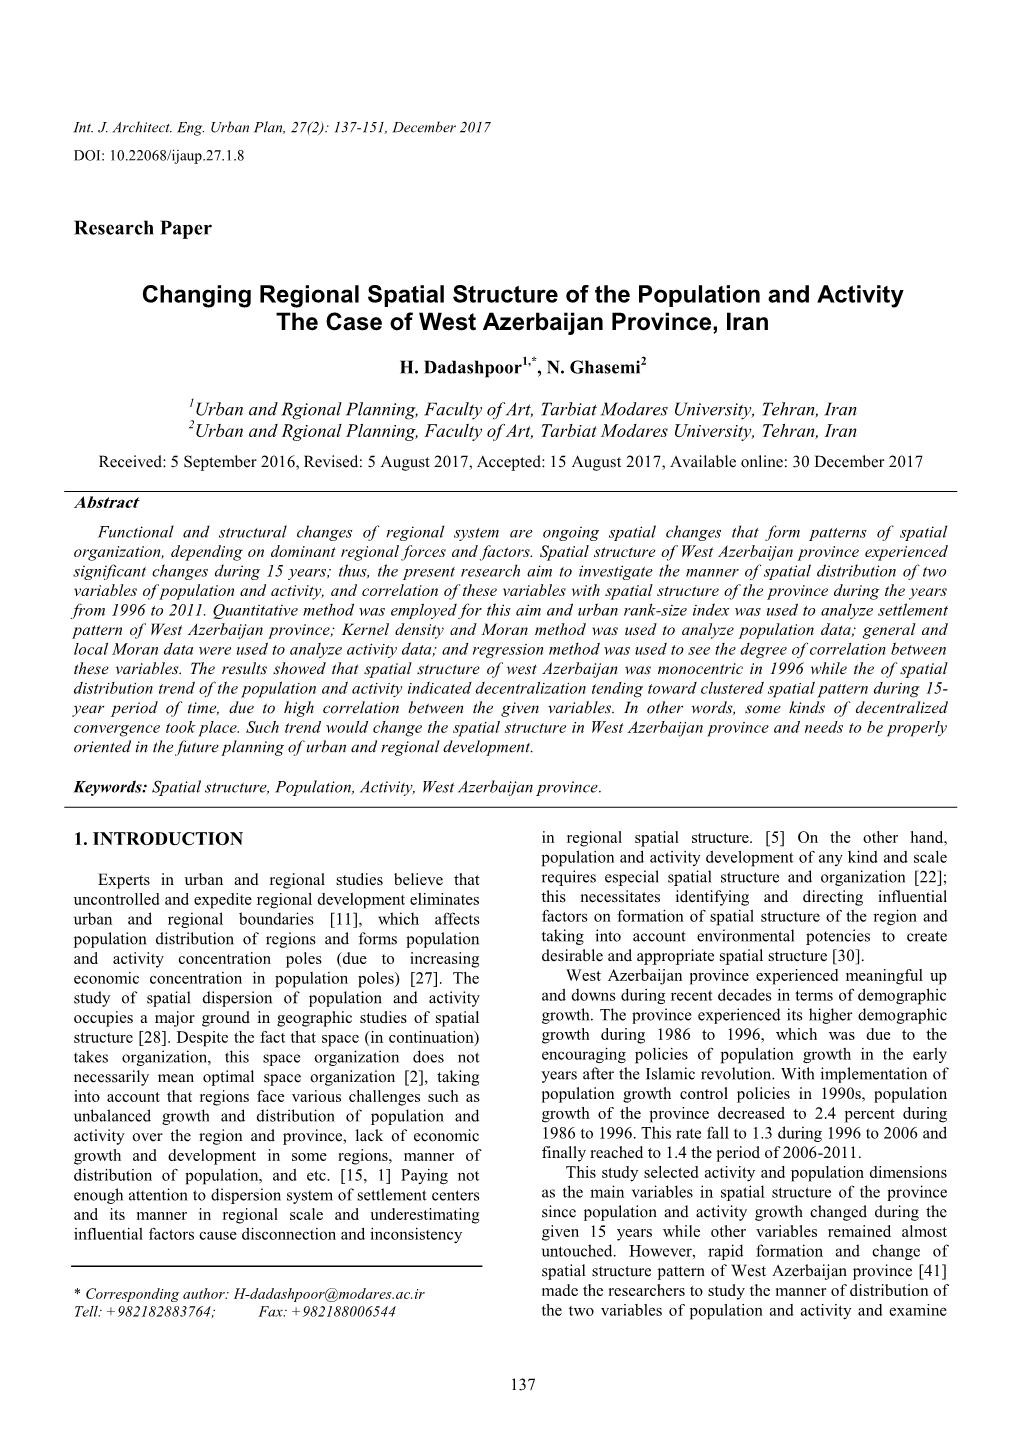 Changing Regional Spatial Structure of the Population and Activity the Case of West Azerbaijan Province, Iran